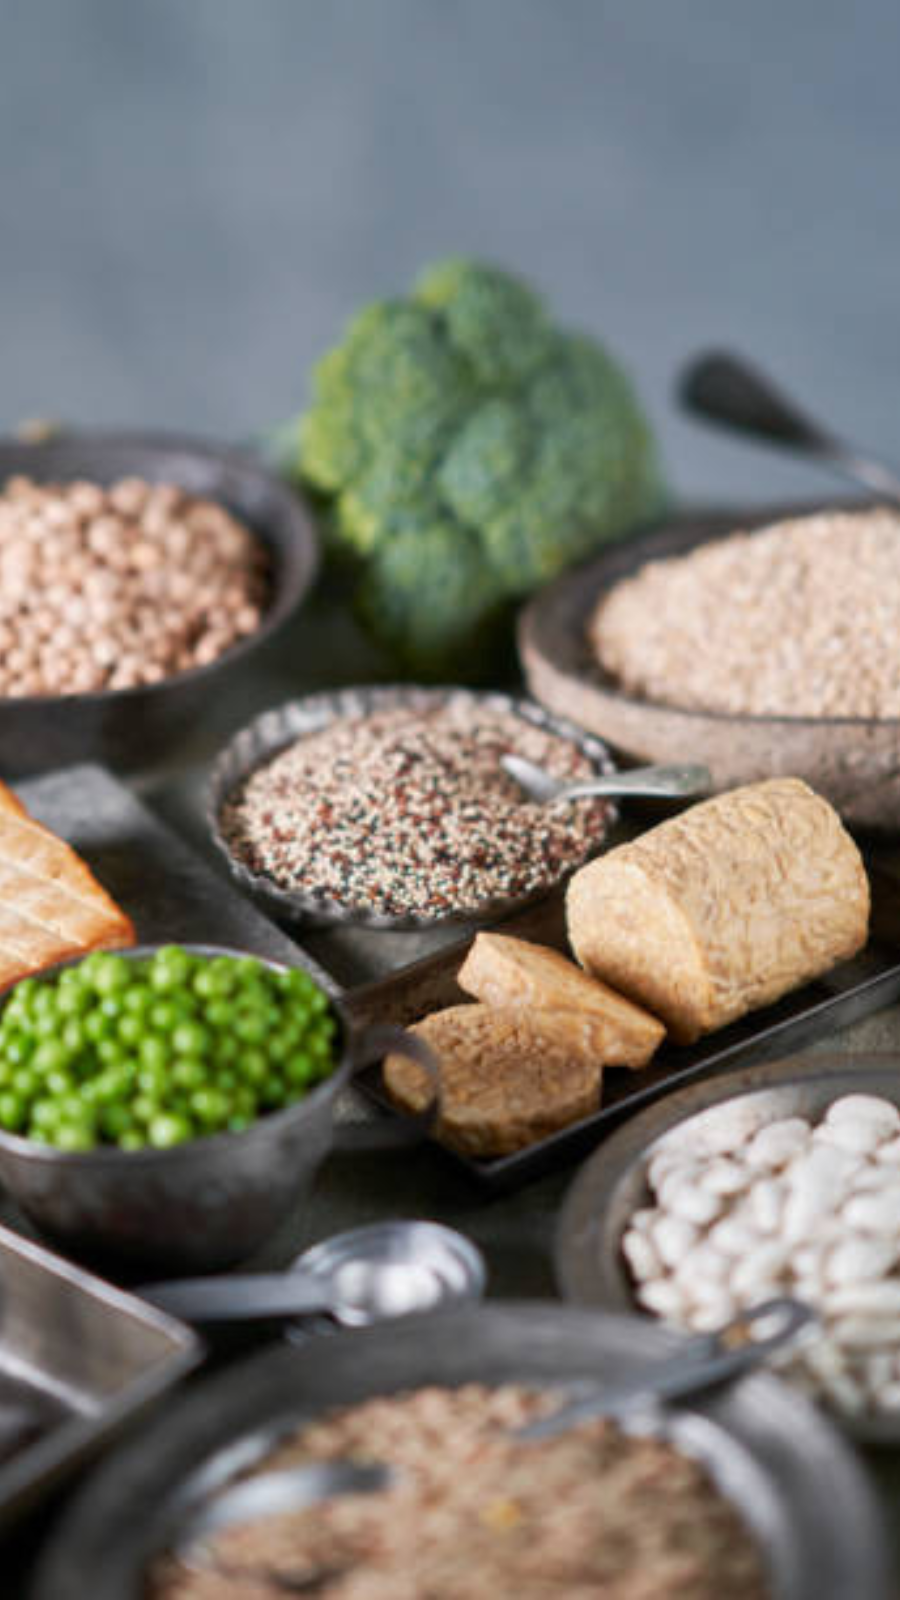 7 plant based protein foods one must include in their diet